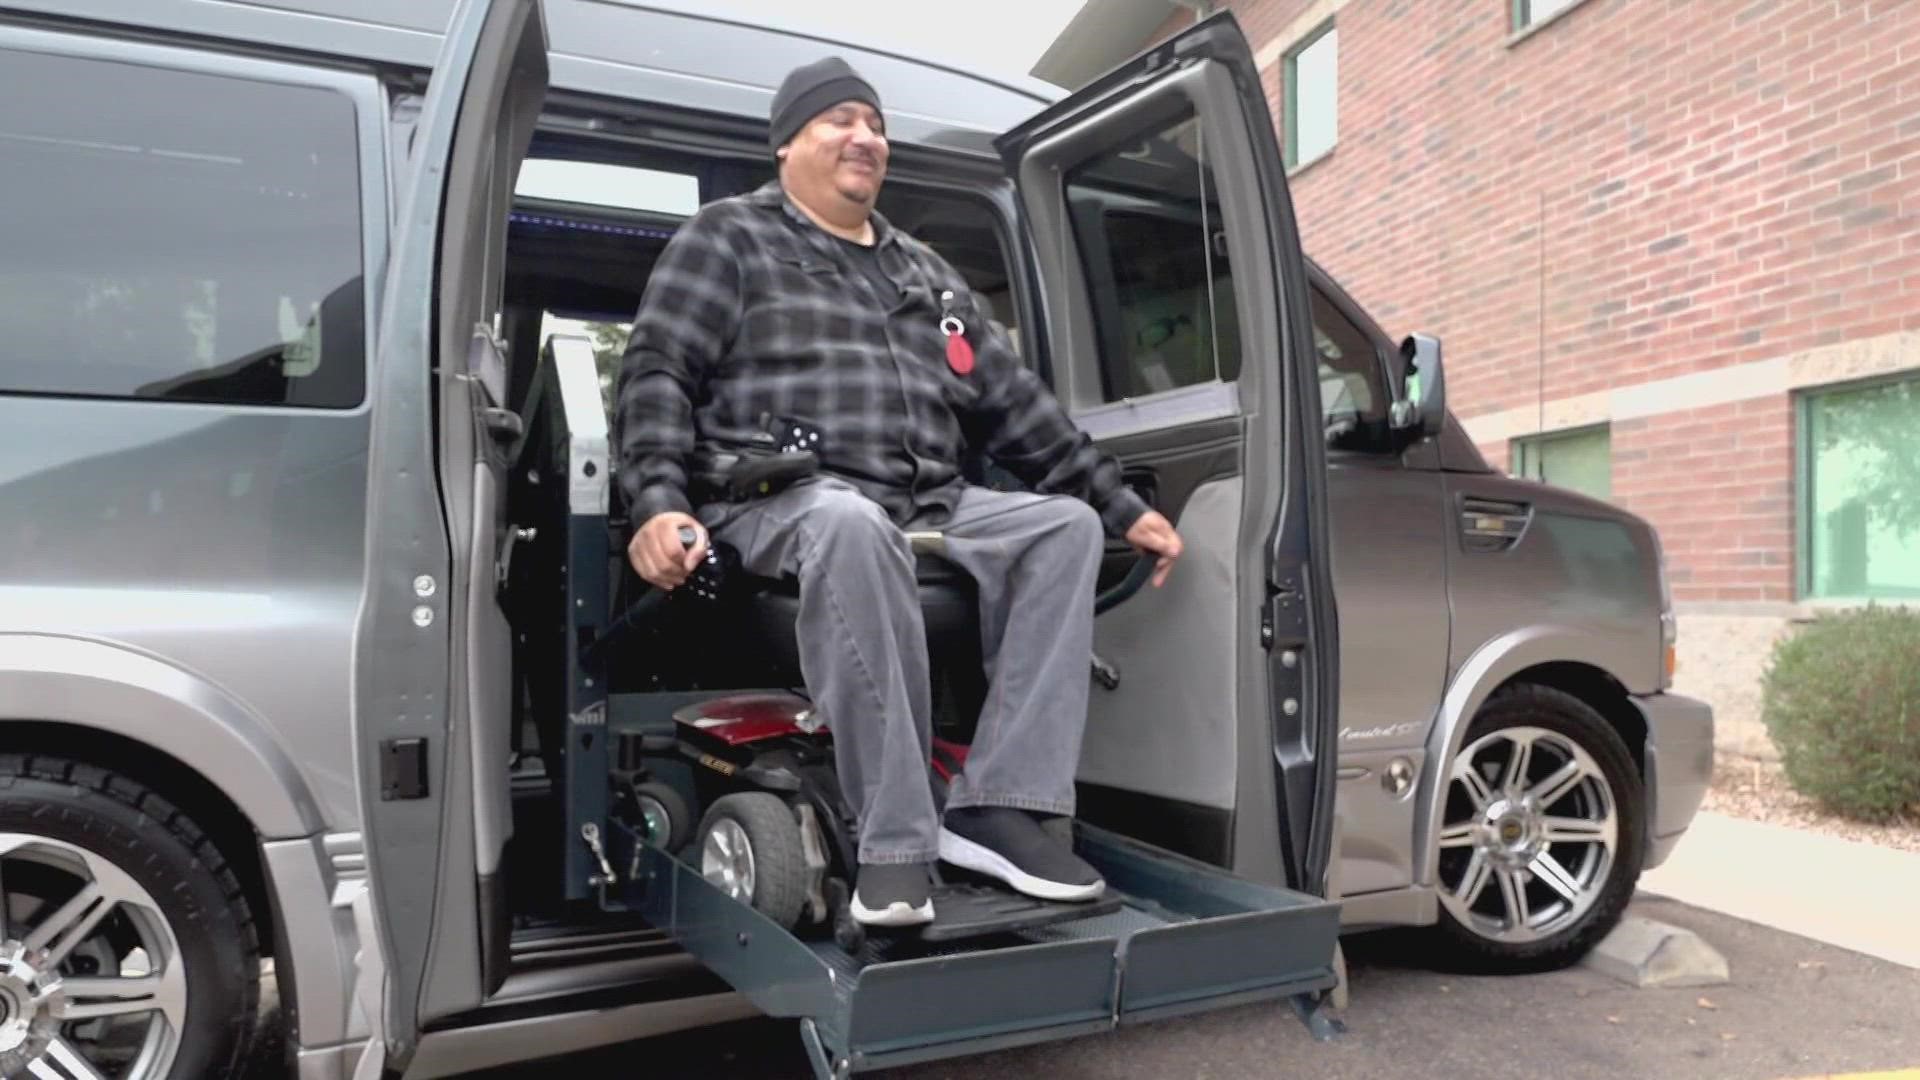 Phoenix firefighters fundraised for more than a year to gift a wheelchair-accessible van for an employee who has worked there for more than 20 years.